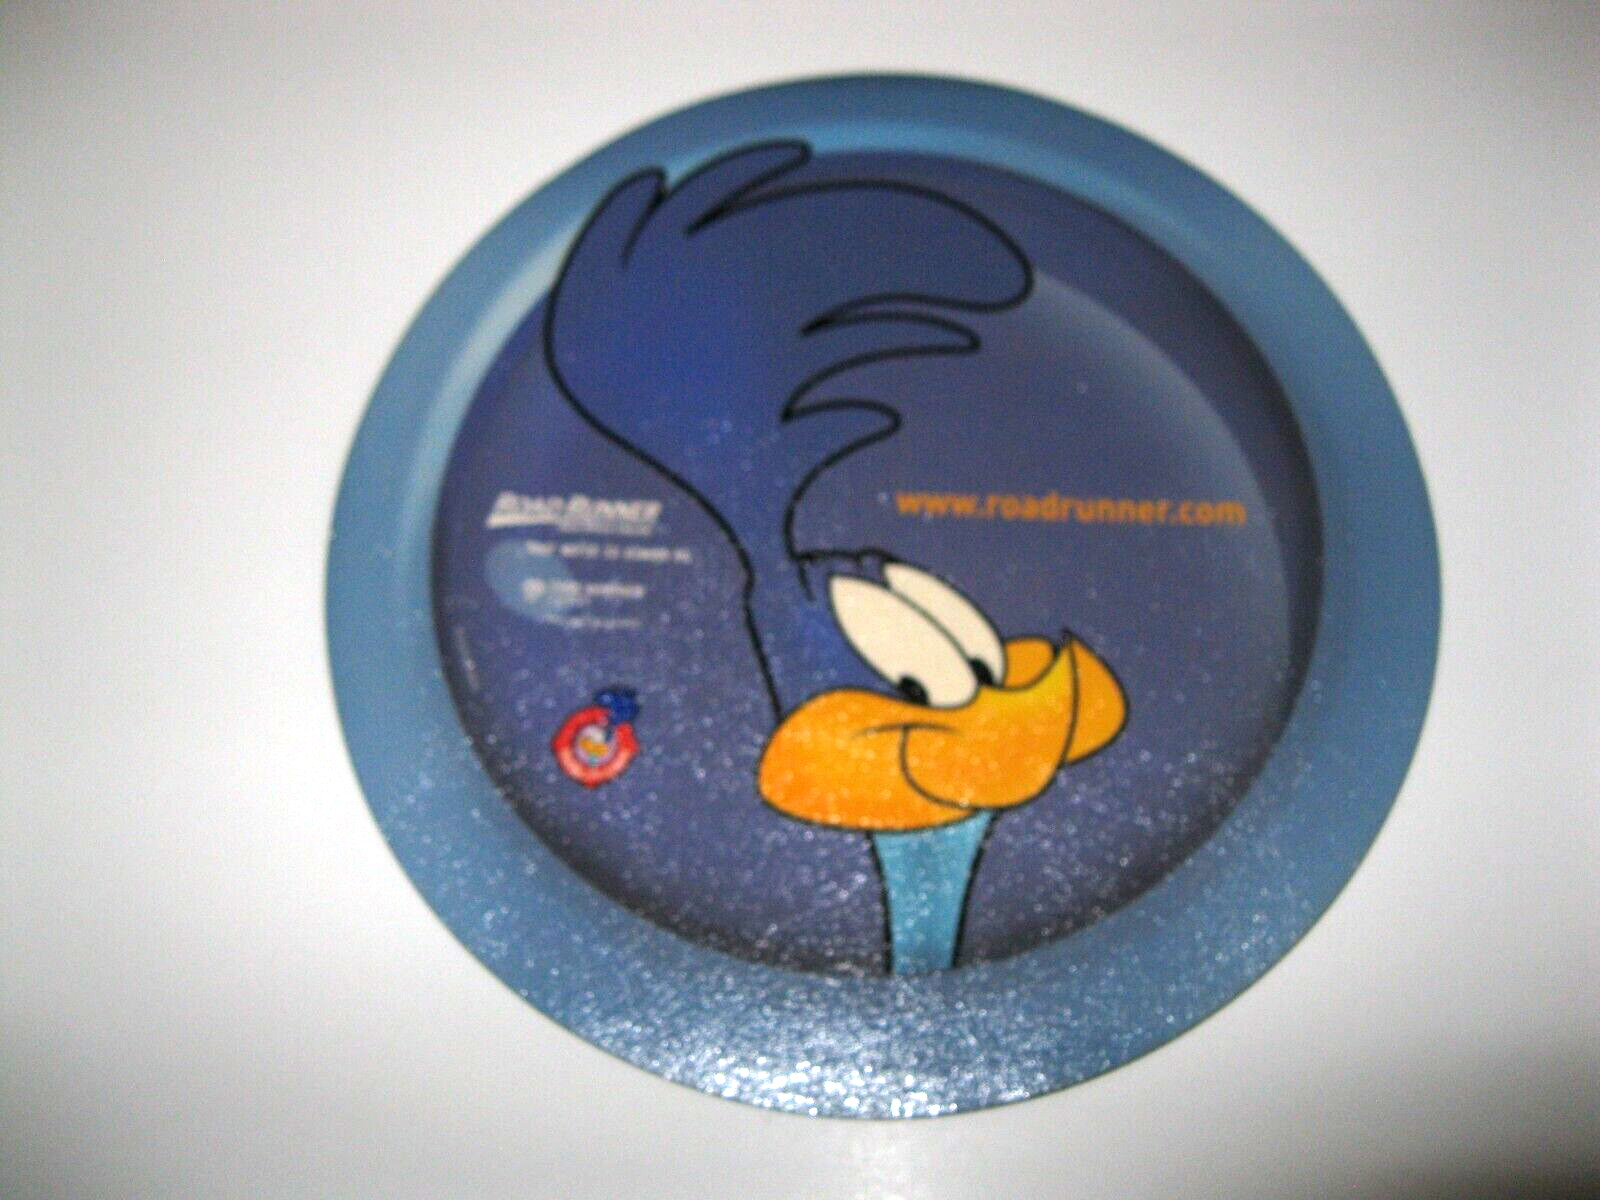 Vintage Time Warner Cable ROAD RUNNER High Speed Online Mousepad Looney Tunes